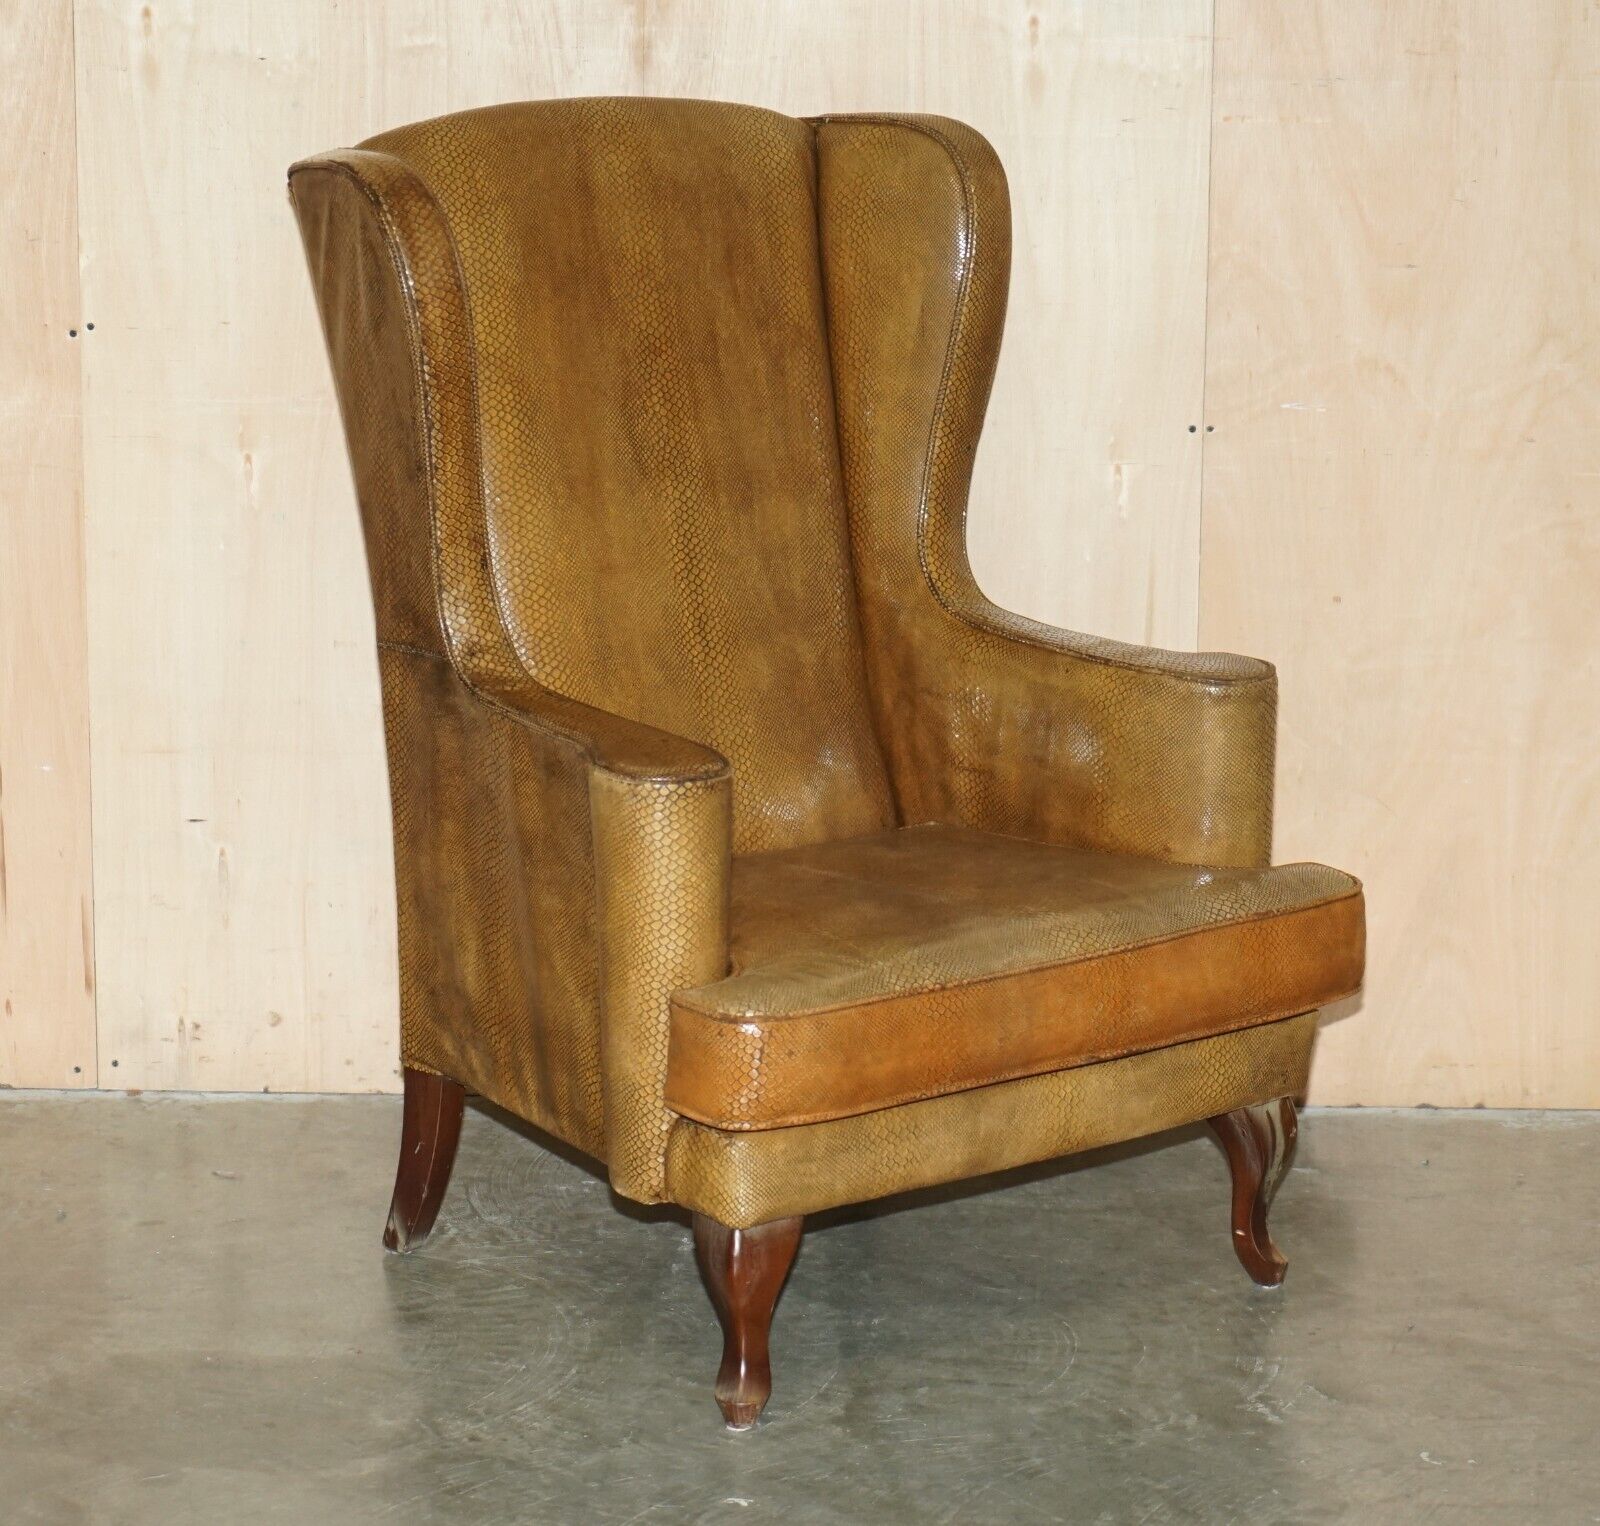 EXQUISITE SPANISH WINGBACK ARMCHAIR WITH ALLIGATOR CROCODILE LEATHER UPHOLSTERY